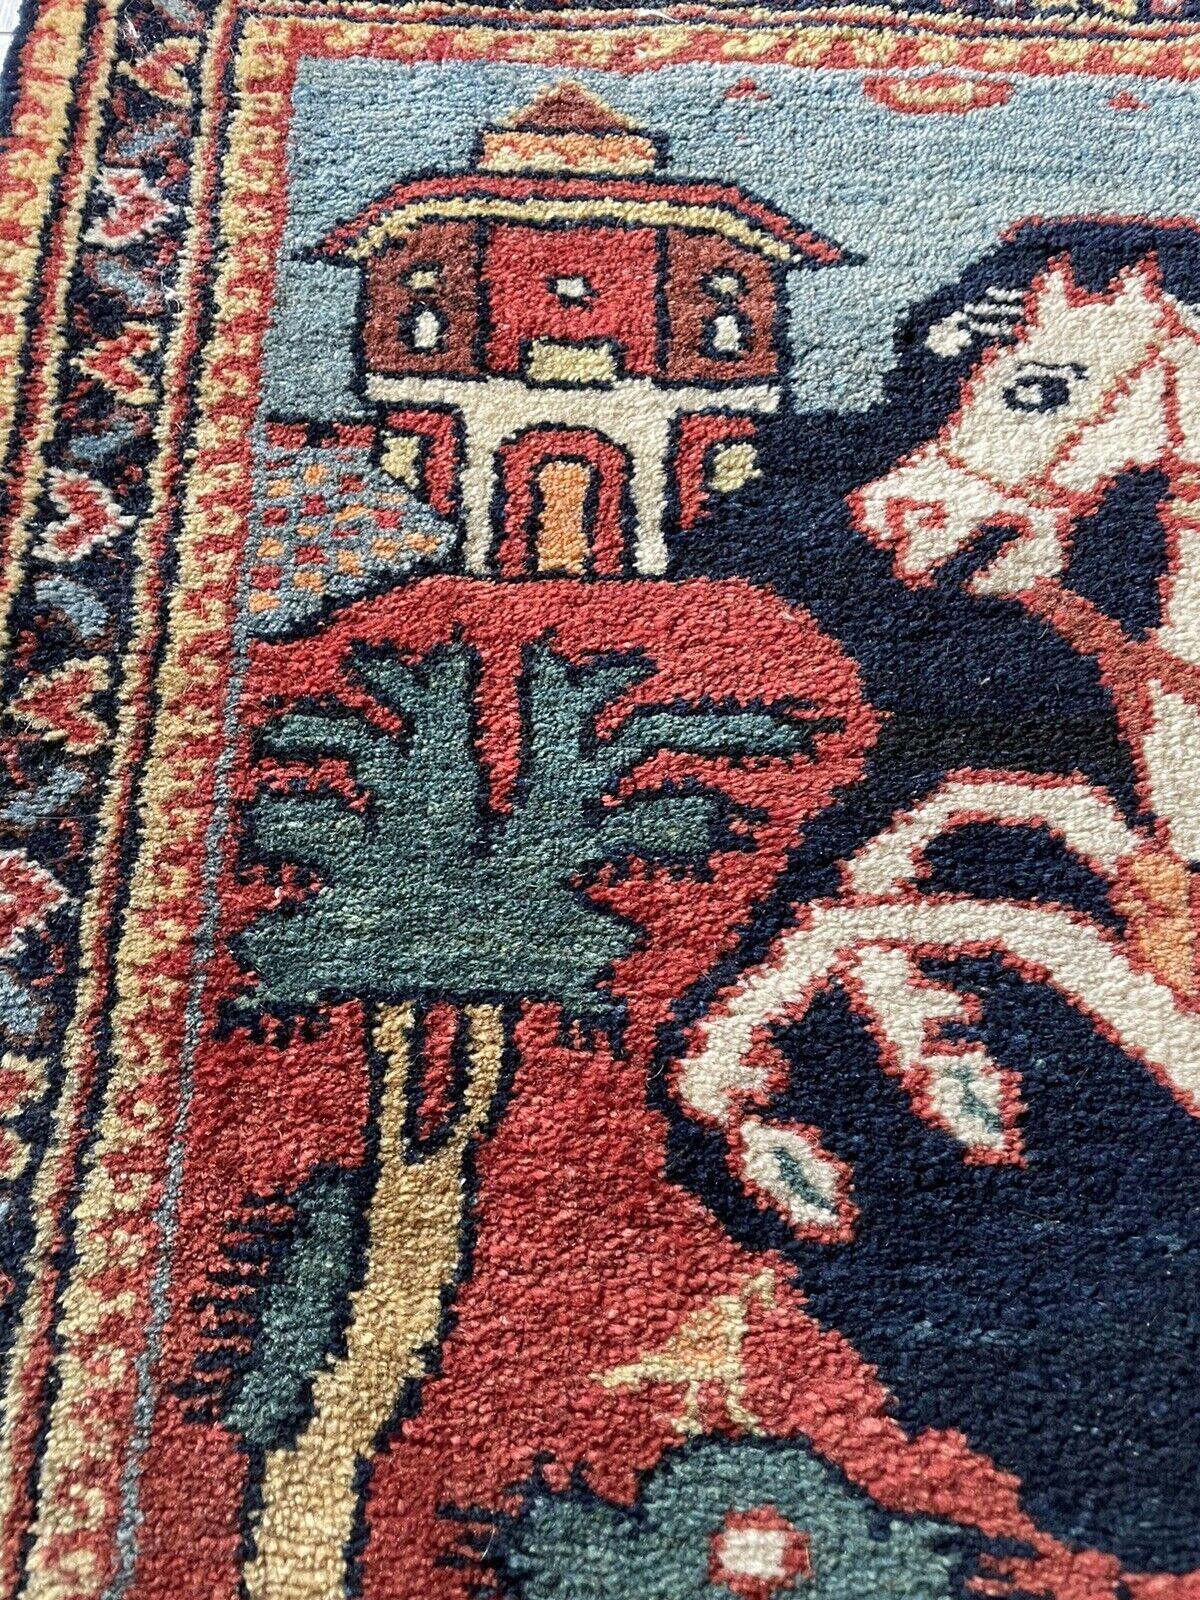 Early 20th Century Handmade Antique Persian Style Lilihan Collectible Rug 2.2' x 3.1', 1920s - 1N01 For Sale